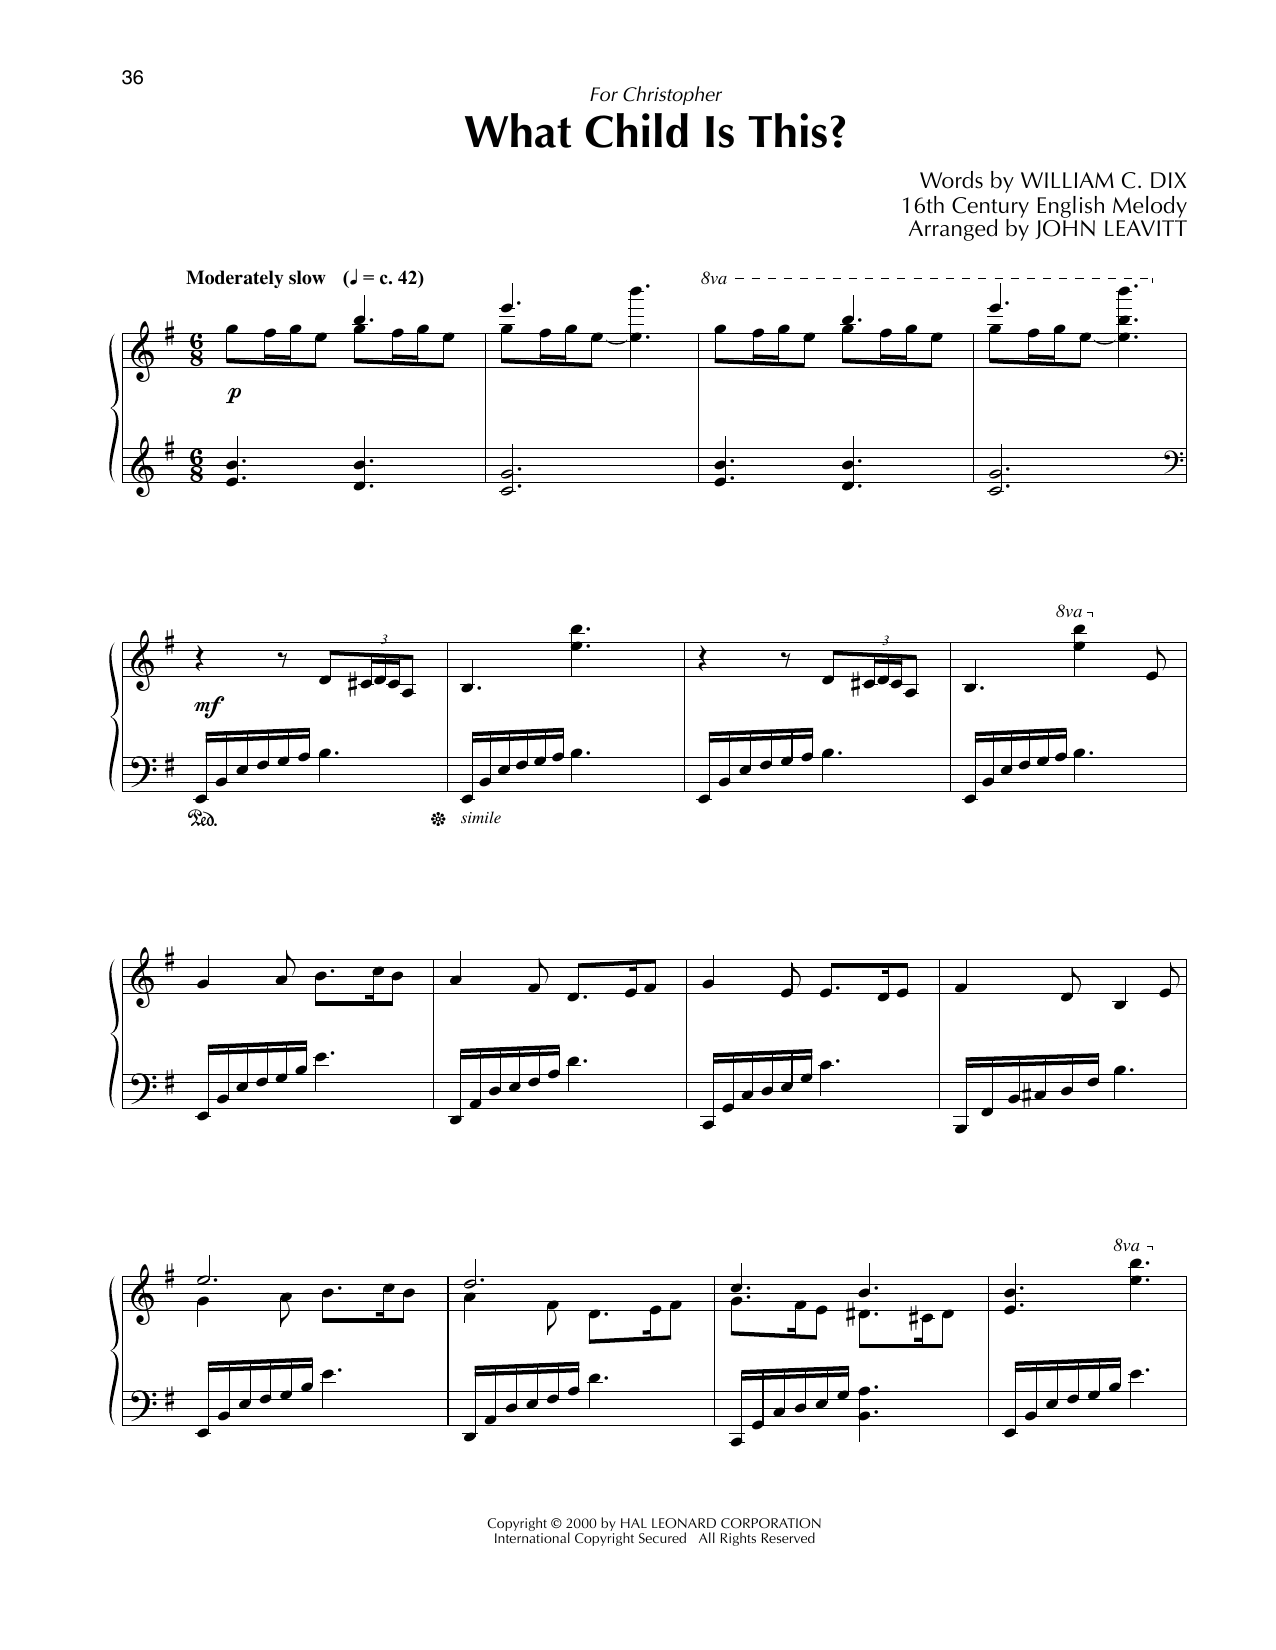 Download 16th Century English Melody What Child Is This? (arr. John Leavitt) Sheet Music